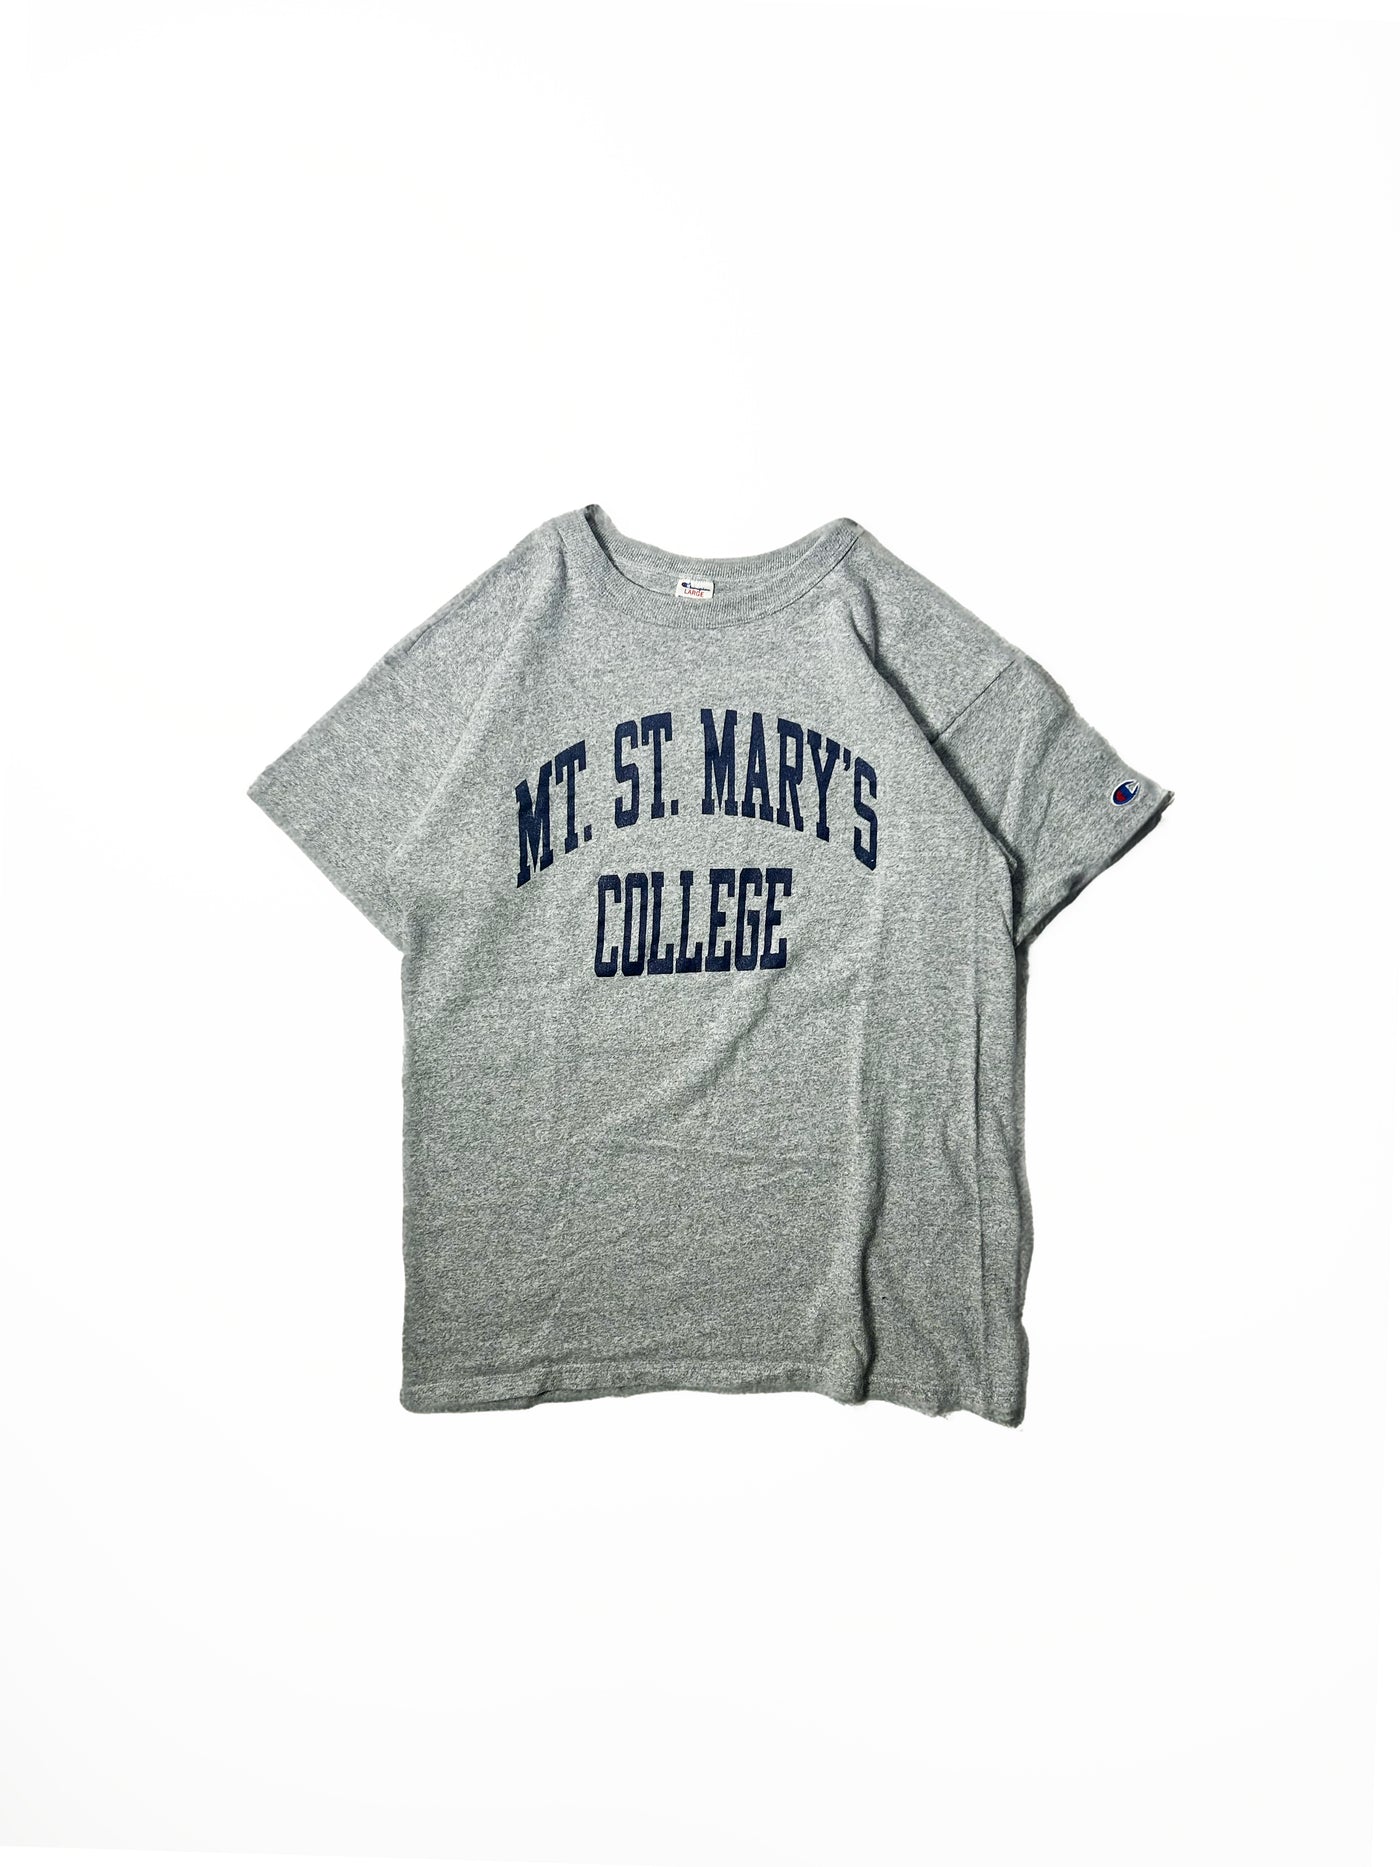 Vintage 80s Mt. St. Mary's College Champion T-Shirt